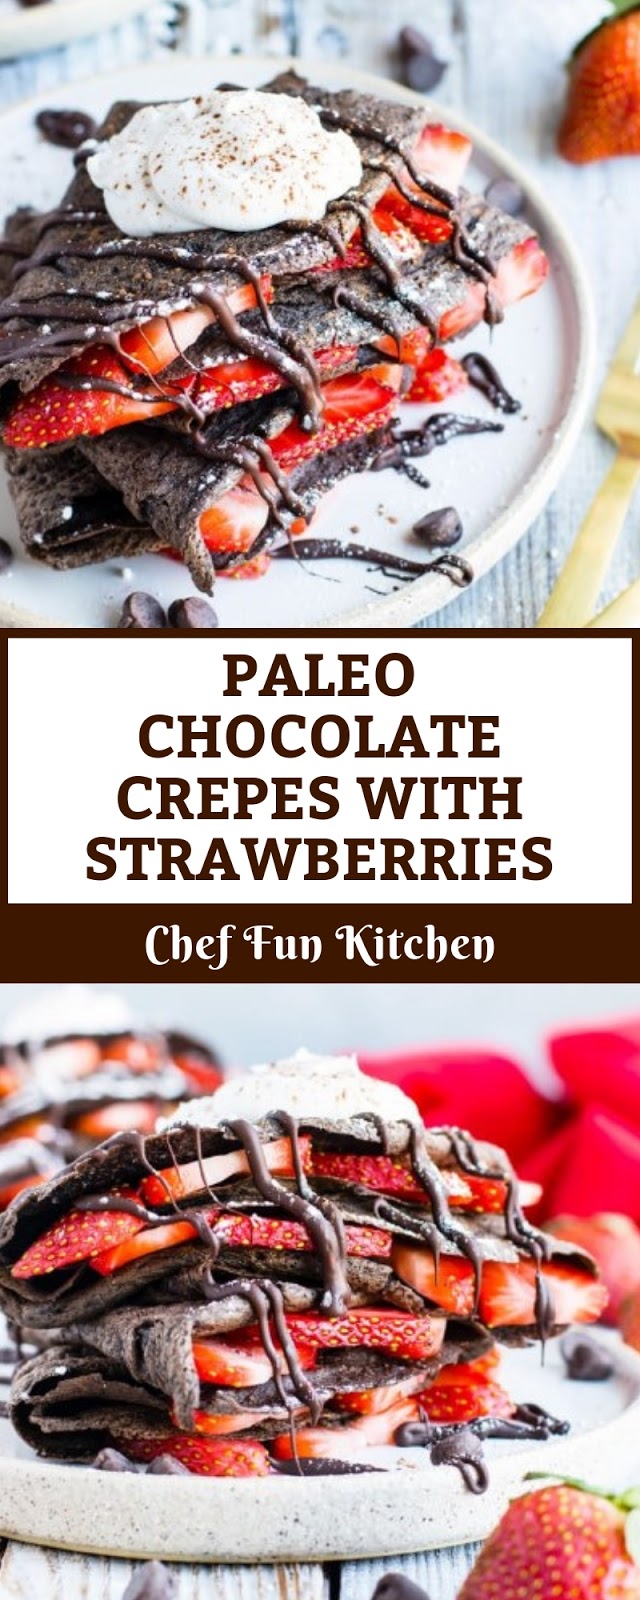 PALEO CHOCOLATE CREPES WITH STRAWBERRIES